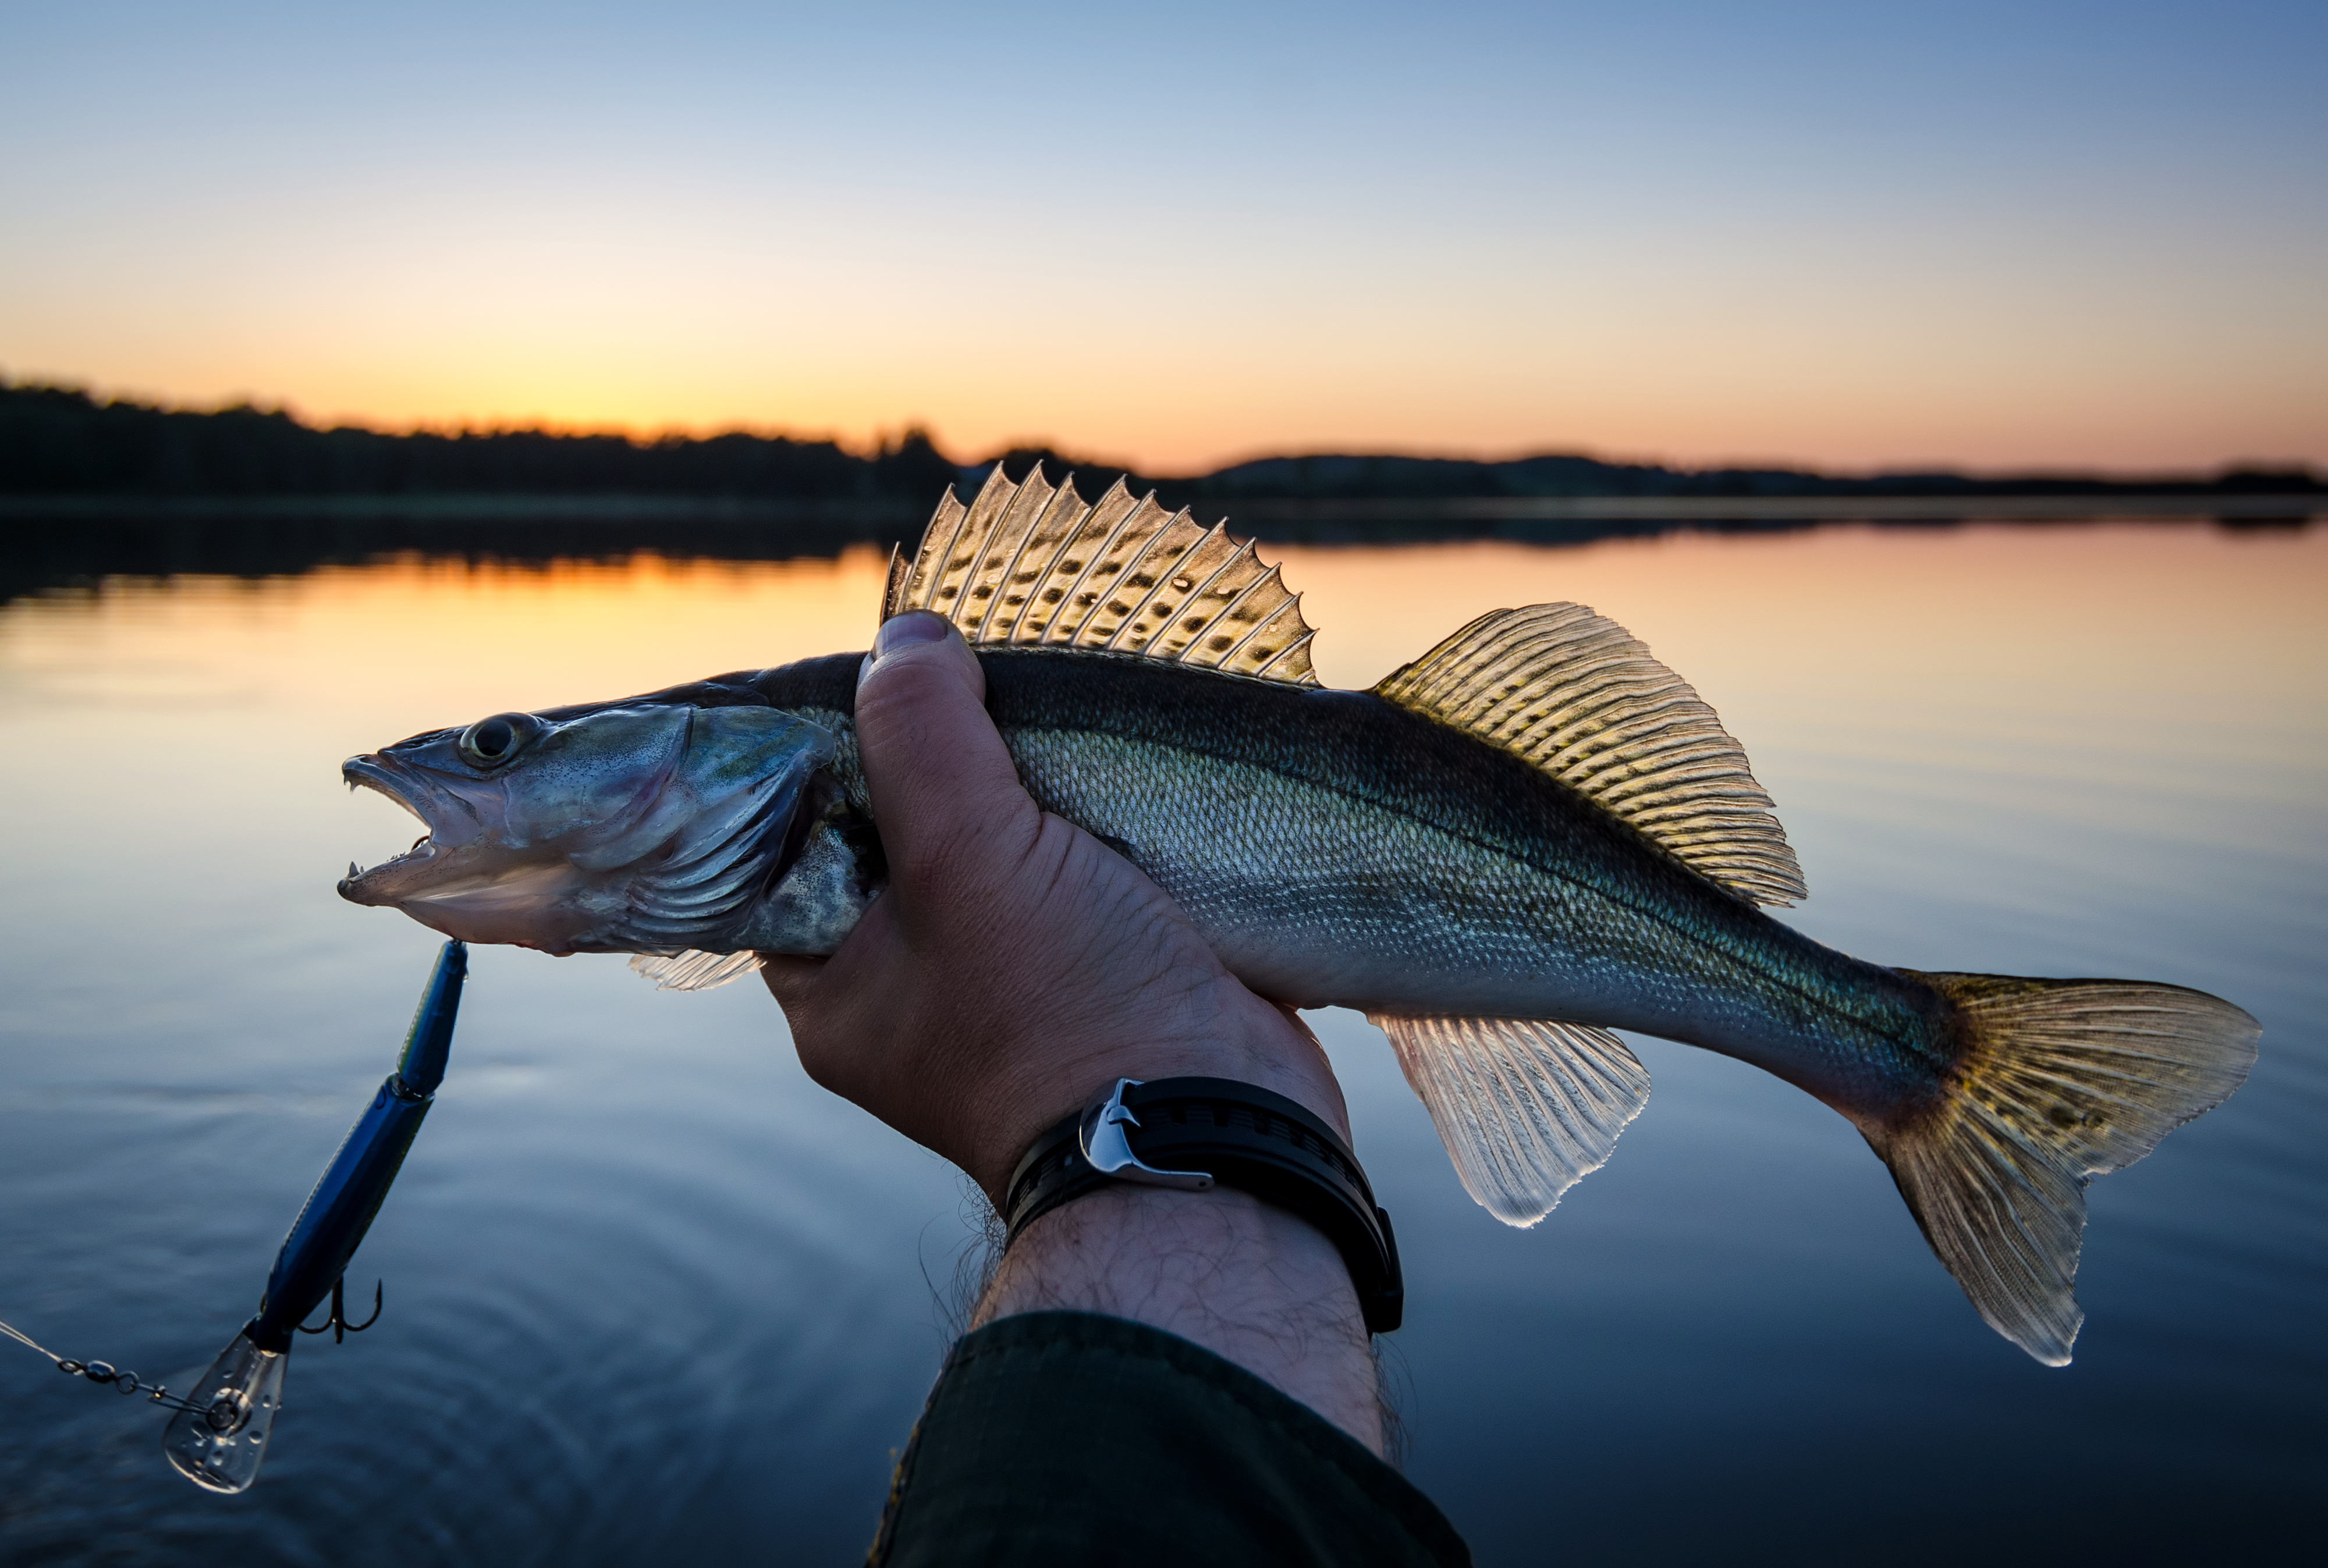 A man hold up a walleye fish against the horizon.